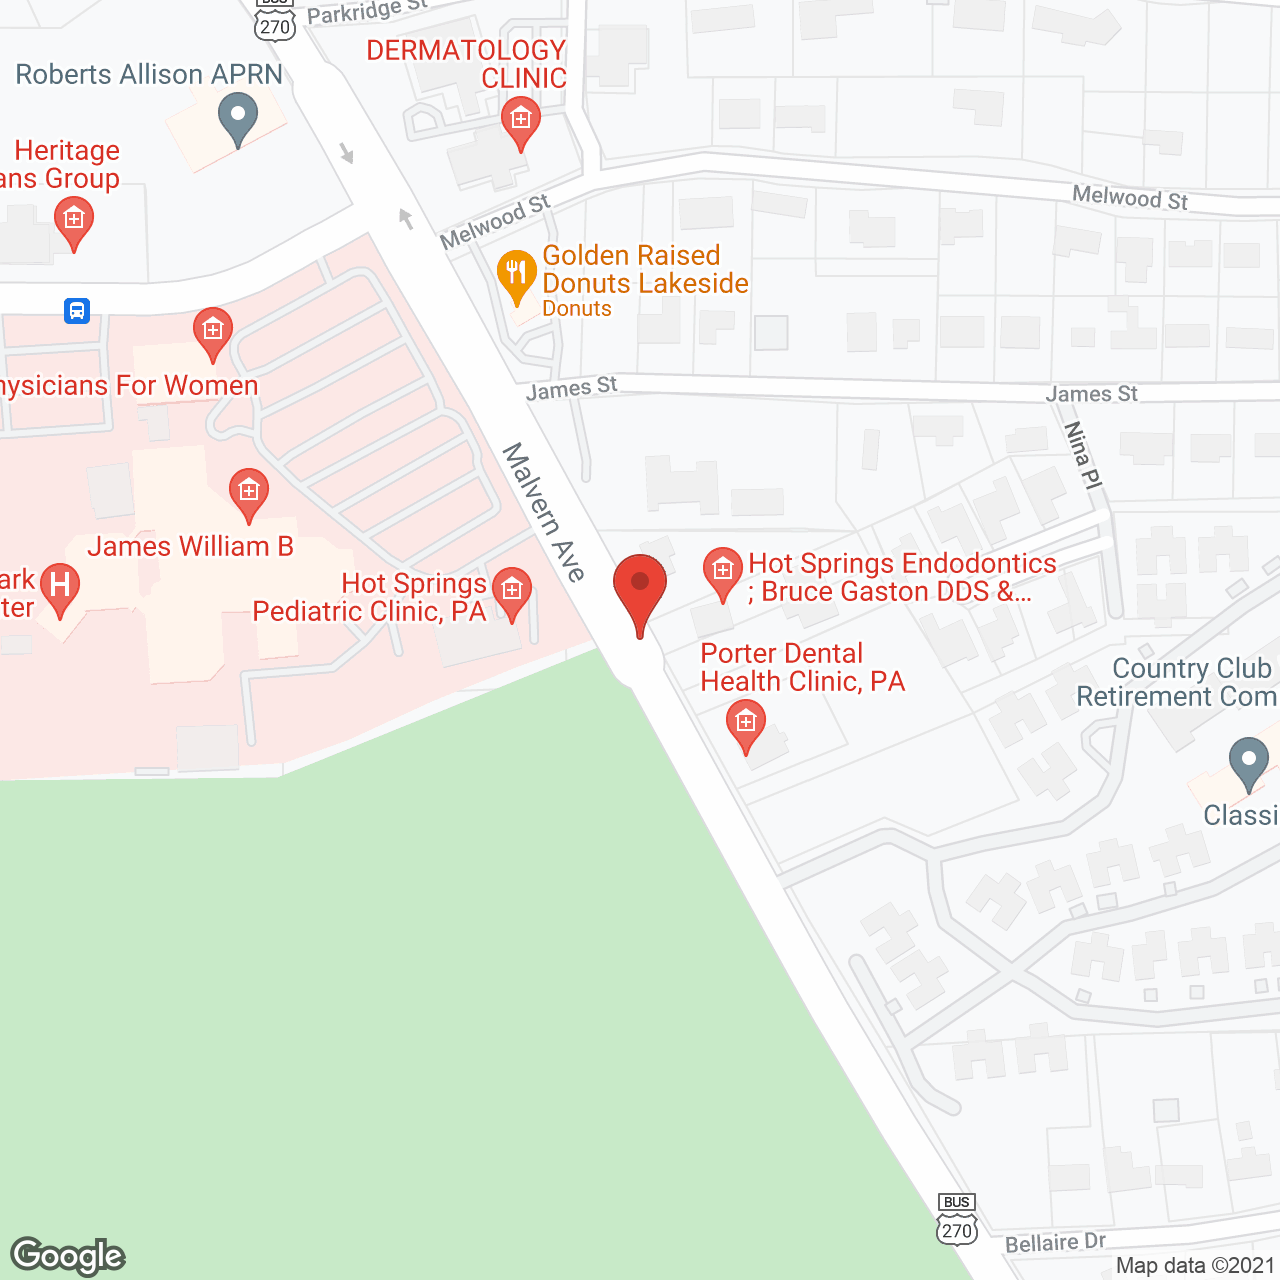 Country Club Village Retirement Community in google map